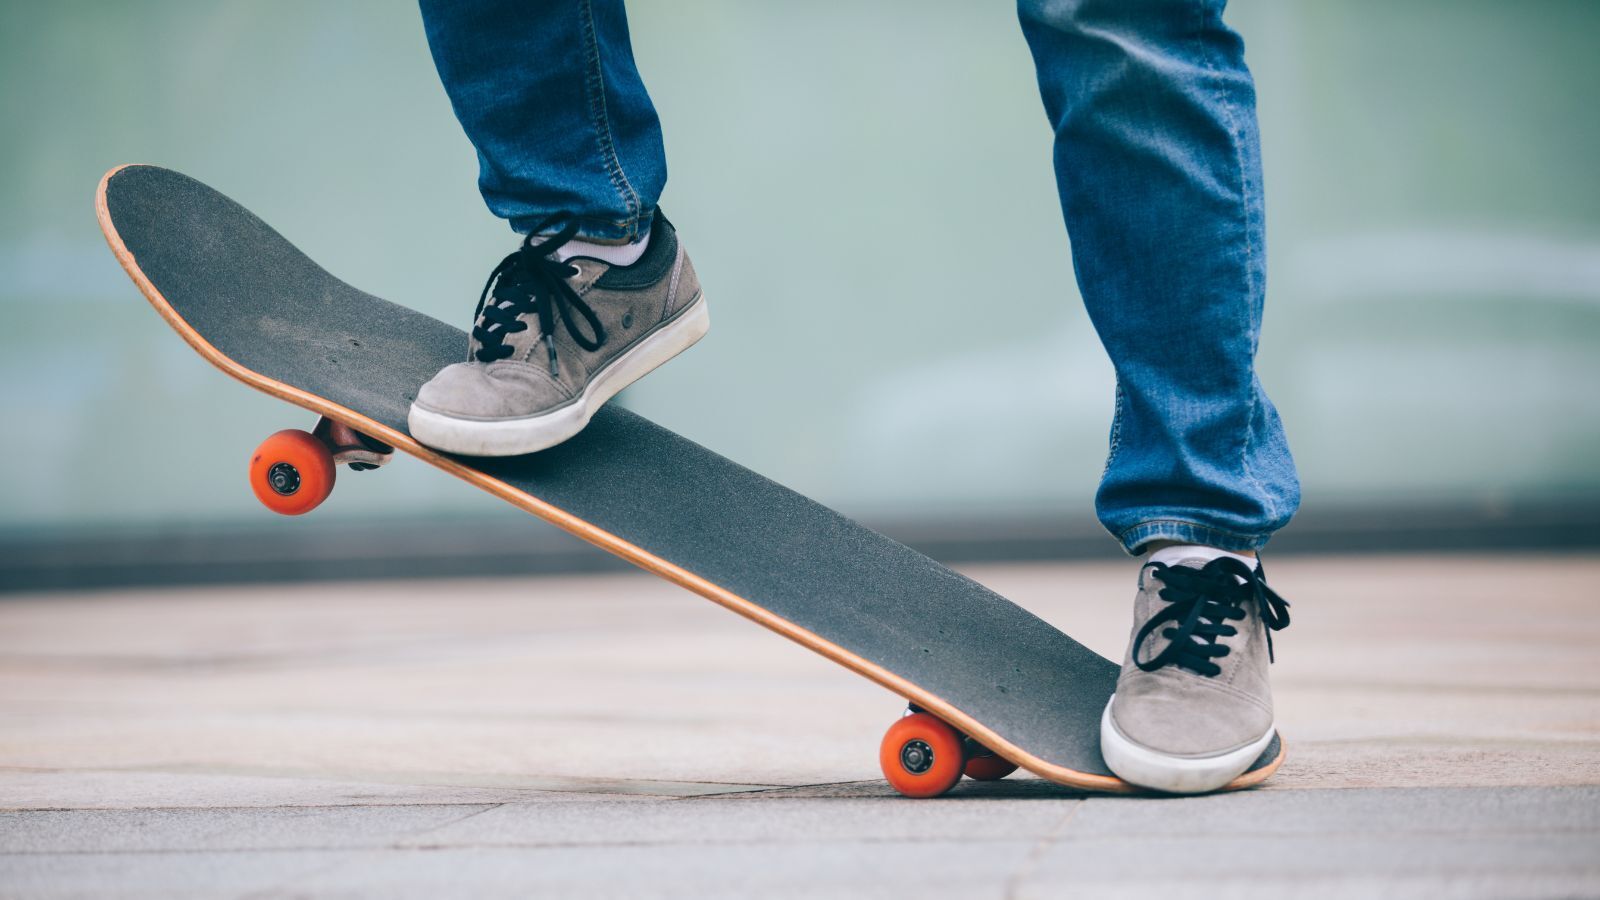 12 Best Skateboard Brands to Maximize Your Fun